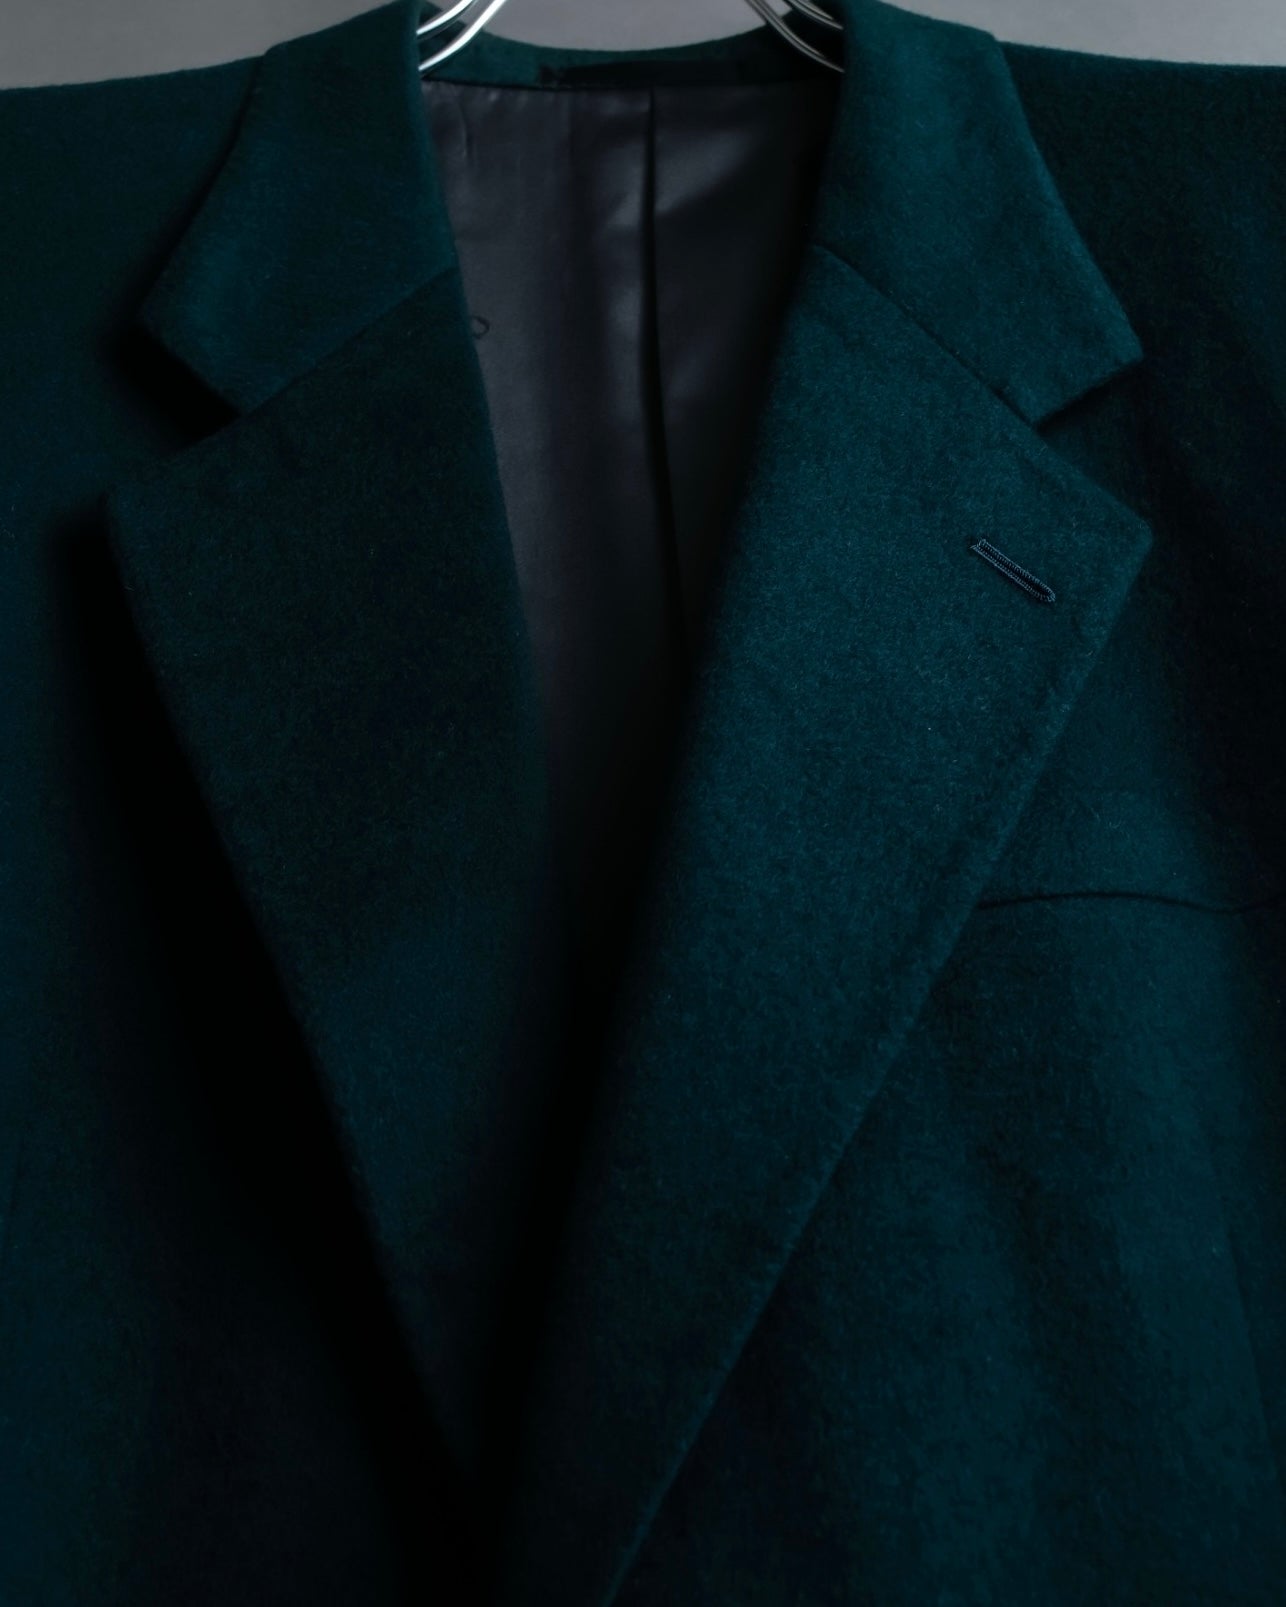 "Christian Dior MONSIEUR" Wool cashmere vibrant blue green tailored jacket